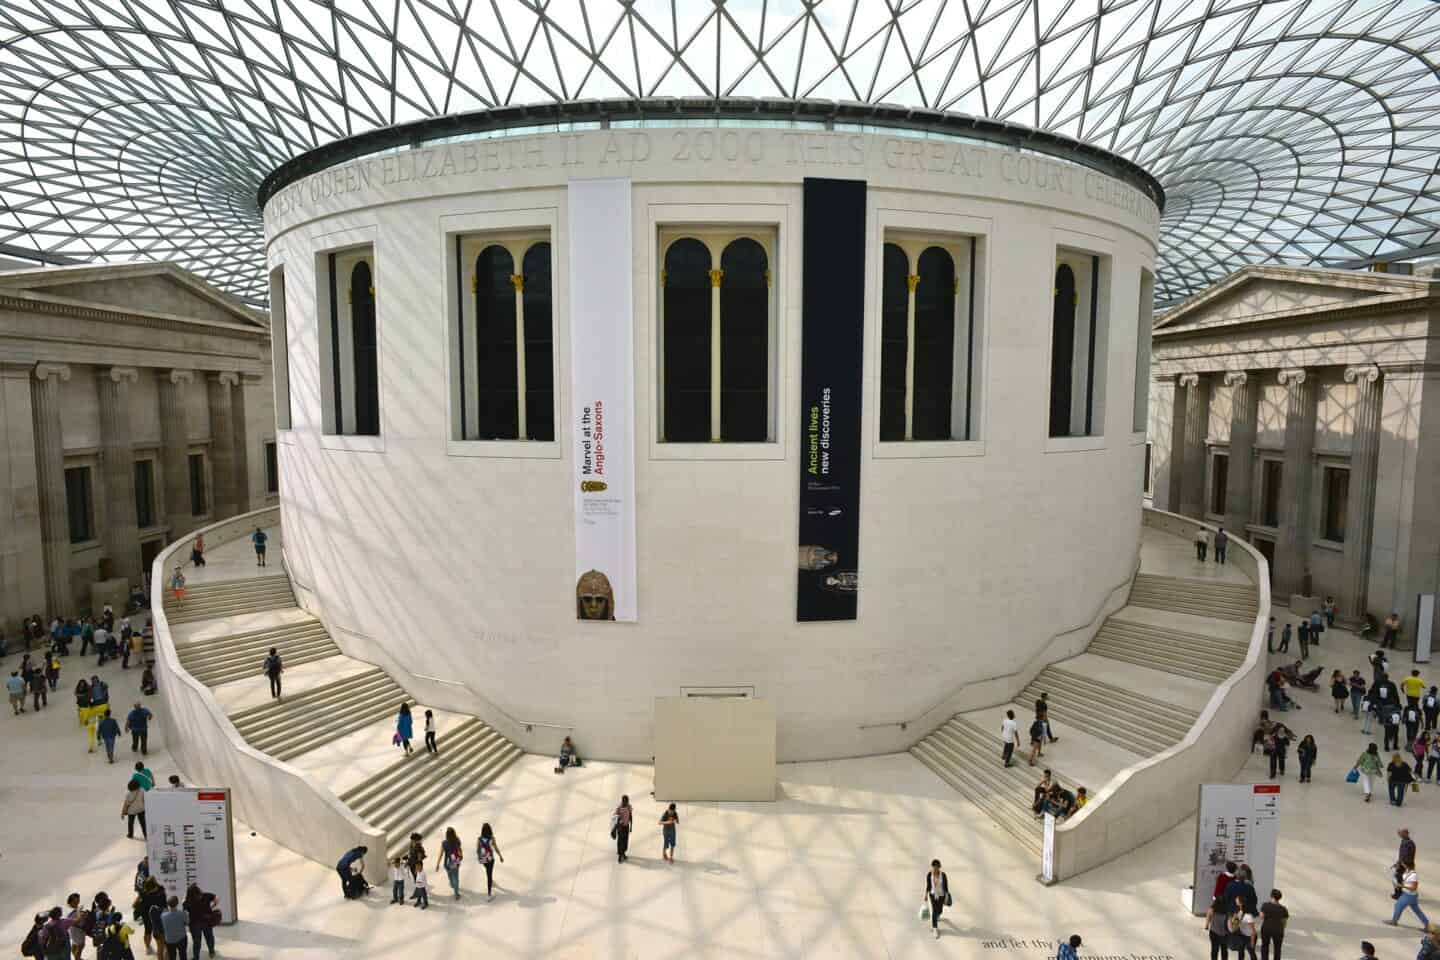 The British Museum inside with glass ceiling | Covent Garden London Guide